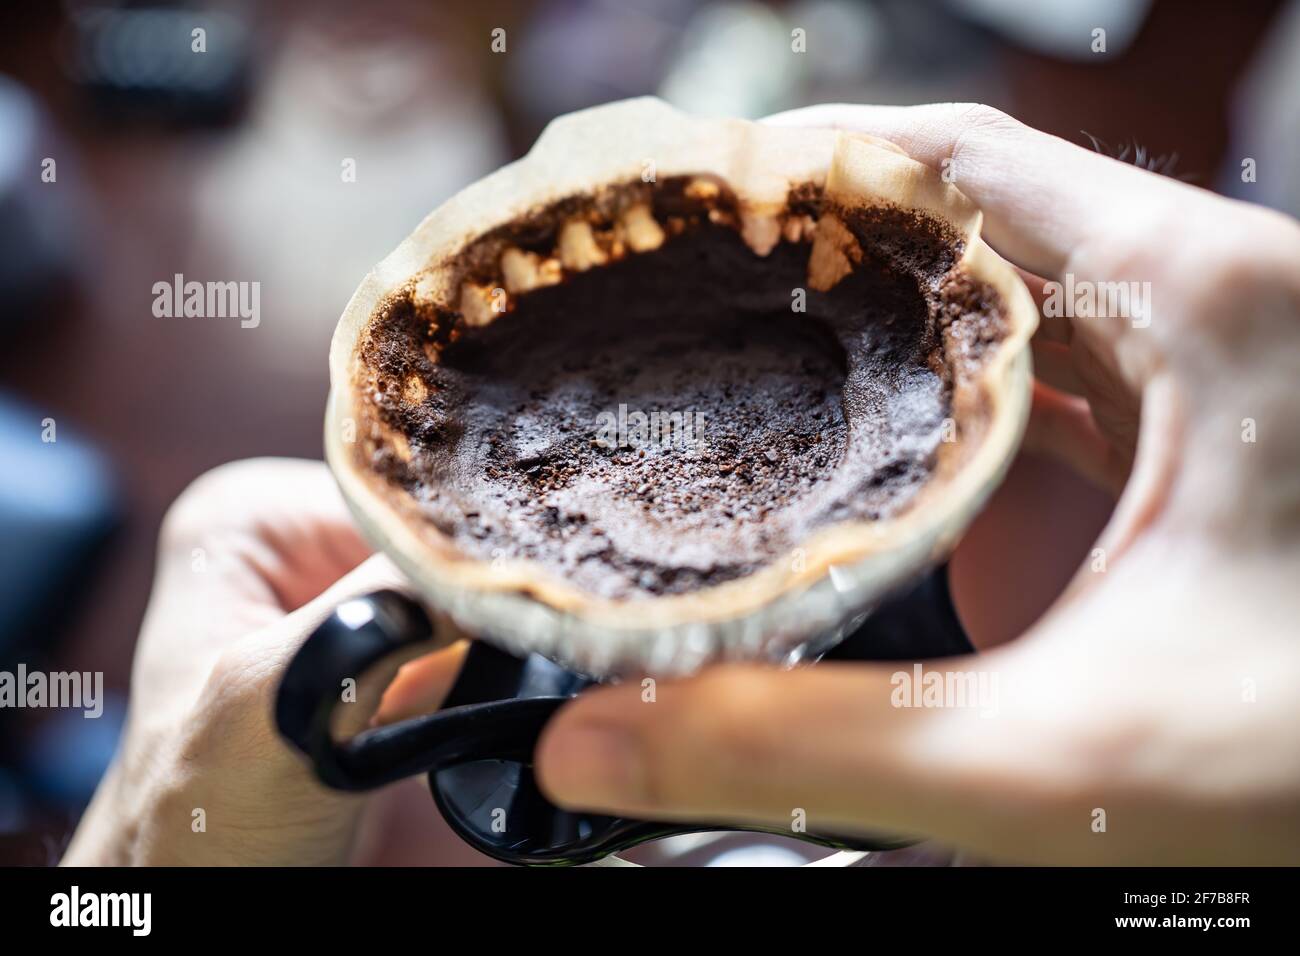 Used coffee ground left in a coffee dripper. Coffee grounds can be used as a fertilizer. Stock Photo